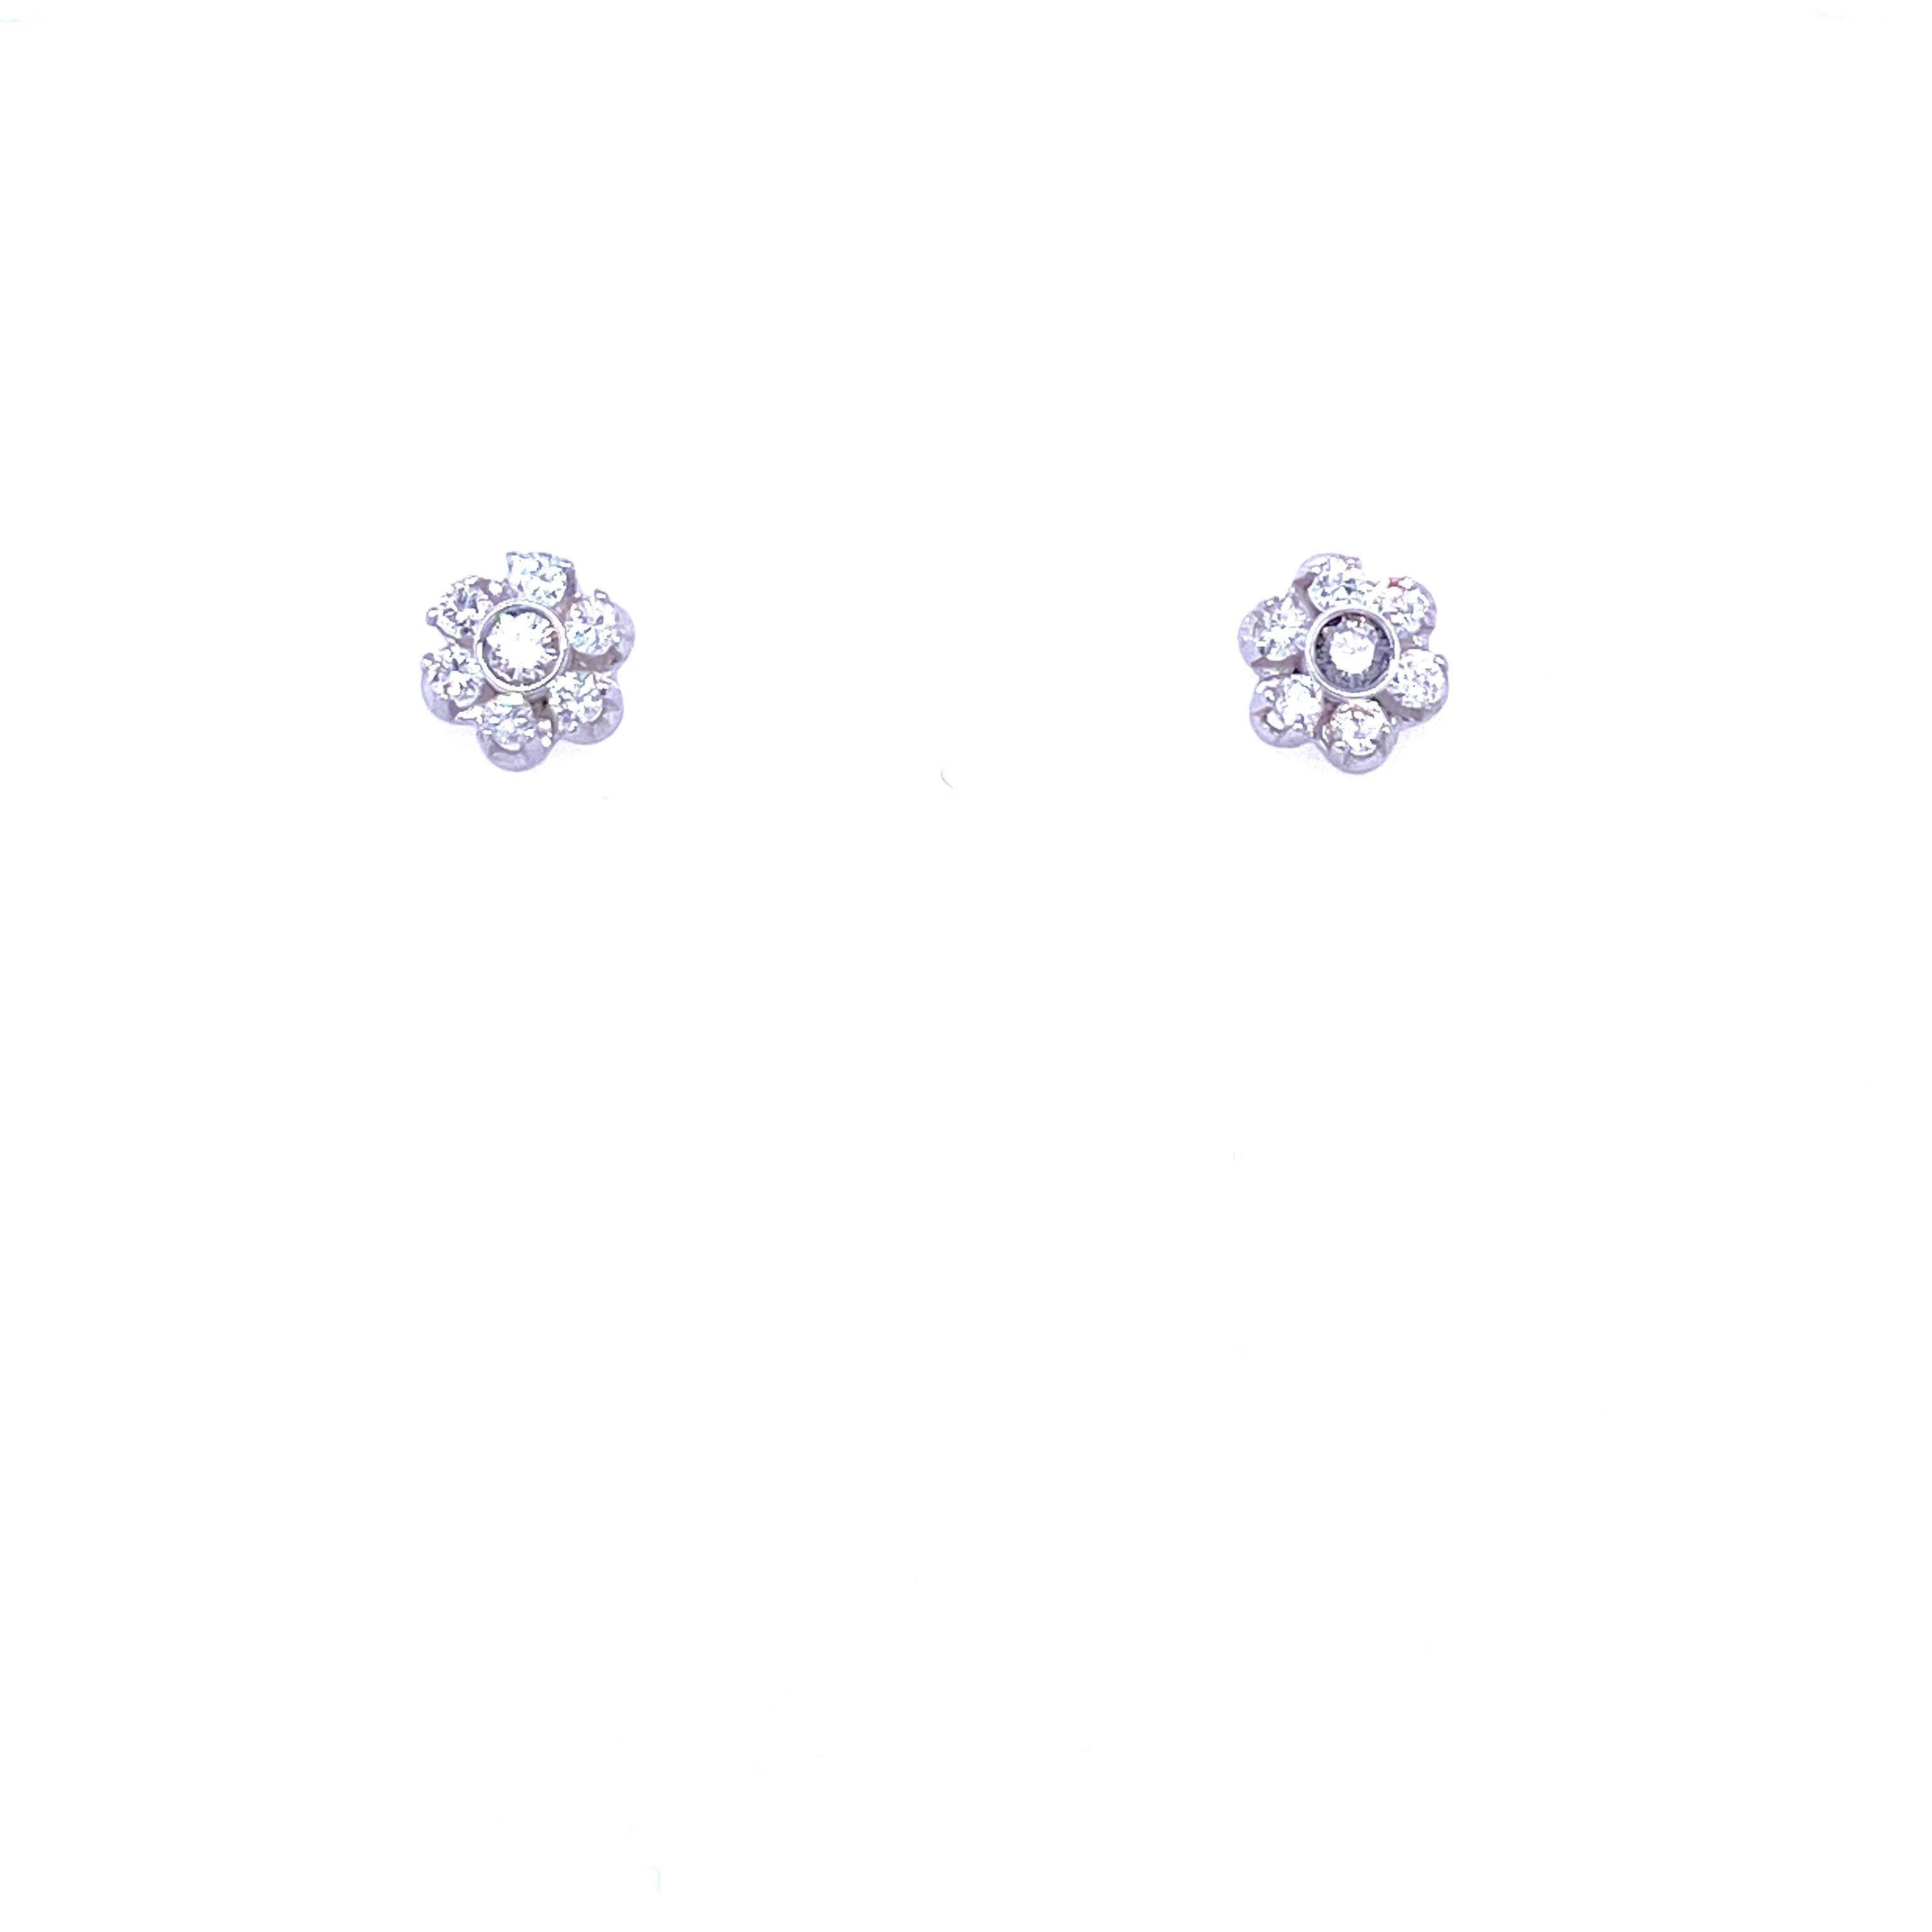 Pretty pair of vintage diamond cluster earrings set in solid 18k Gold. They are set with Round Brilliant cut Diamonds graded color G clarity Vvs2. 
Origin Italy 1980

CONDITION: Pre-owned - Excellent 
METAL: 18k Gold
STONE: Diamond 0,60 total